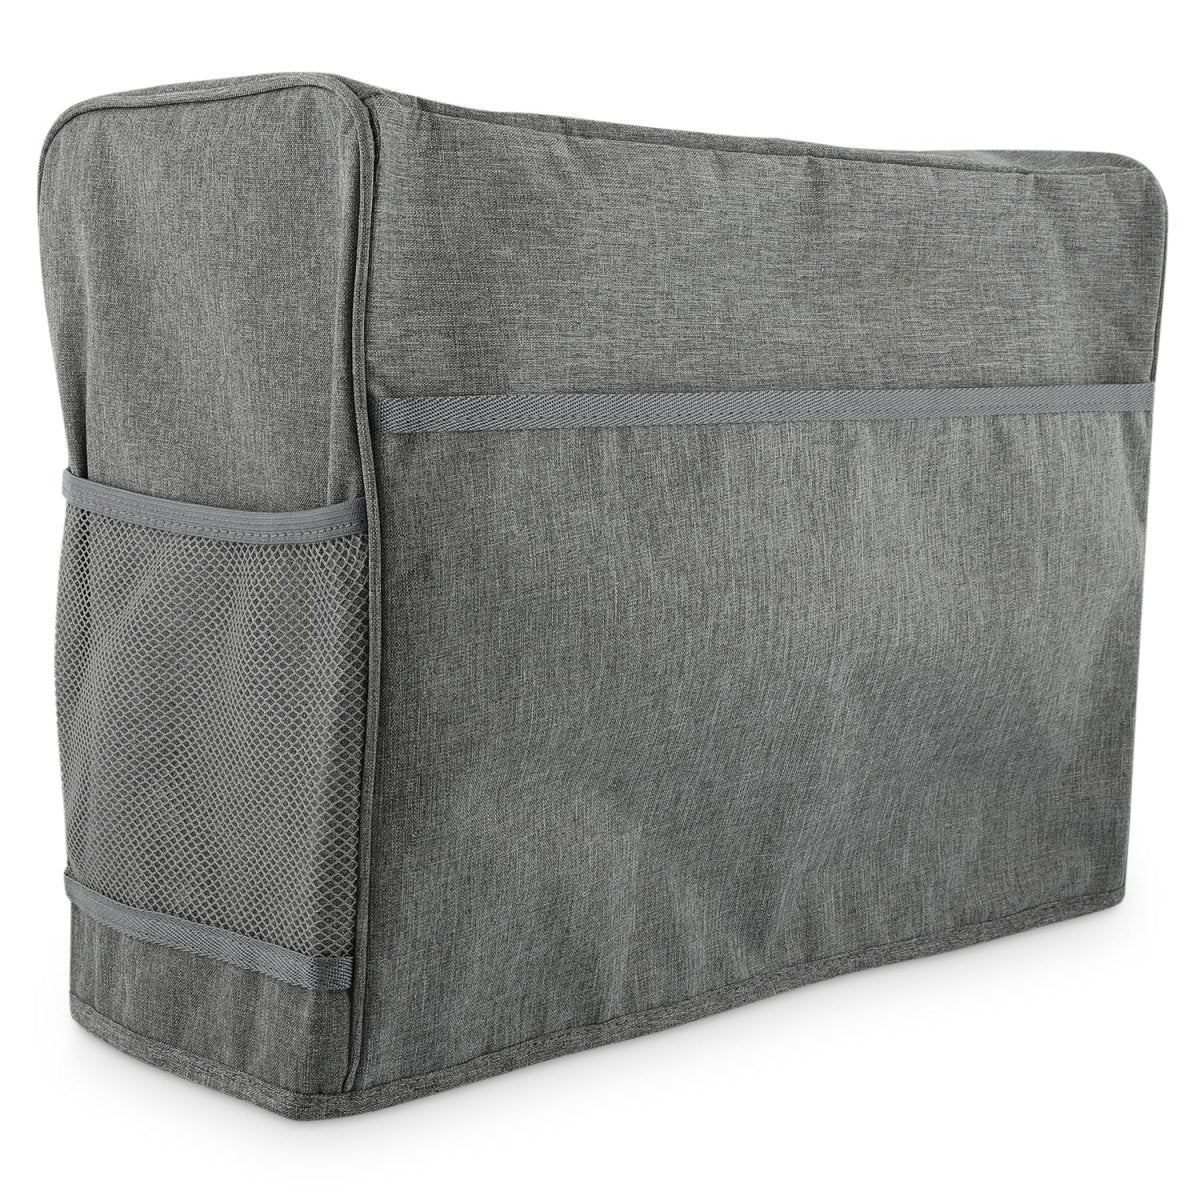 Dust Cover Sewing Storage Bag Machine Cover With Pockets Portable